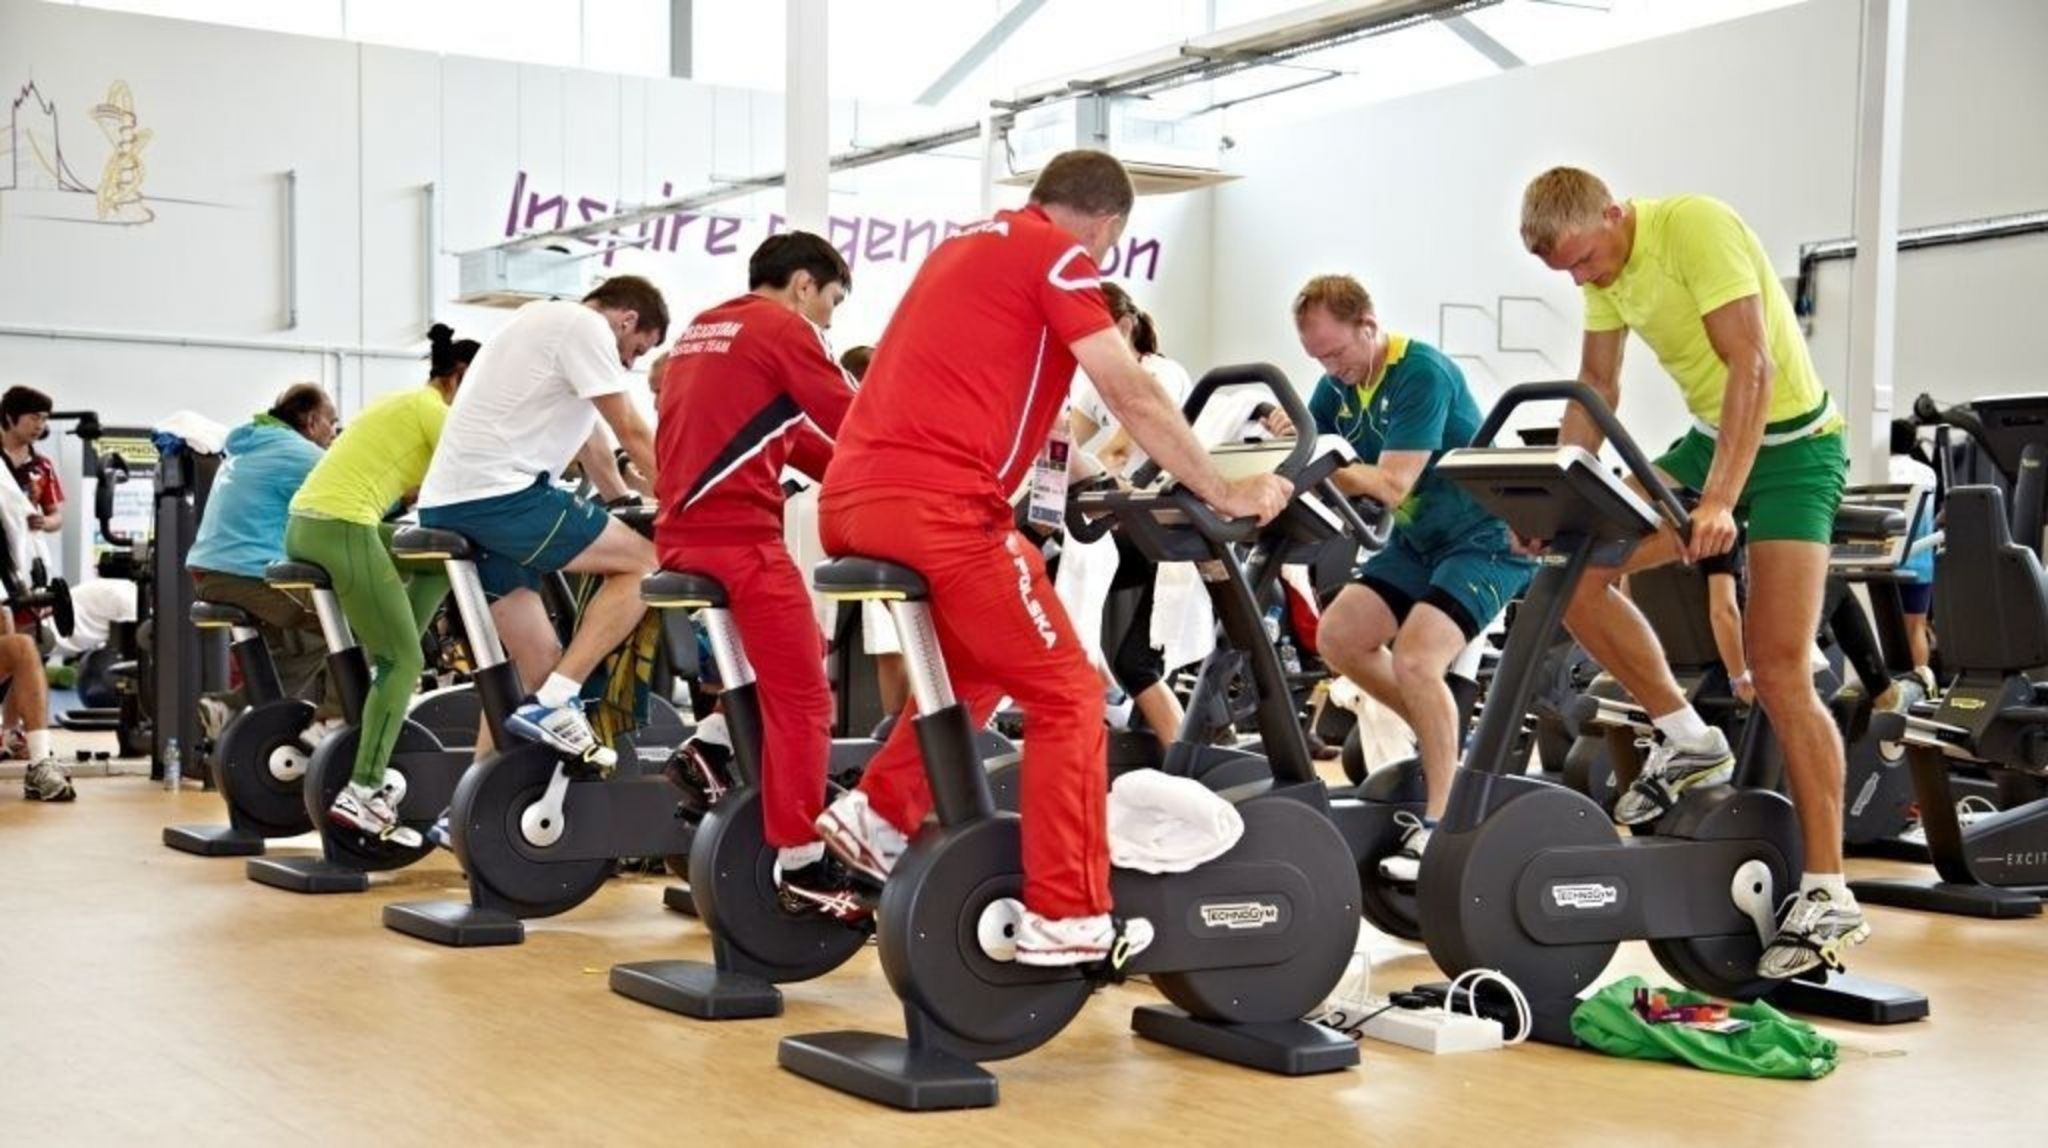 Paris 2024 will be the ninth Olympic Games that Technogym has provided fitness equipment, including London 2012 ©Technogym